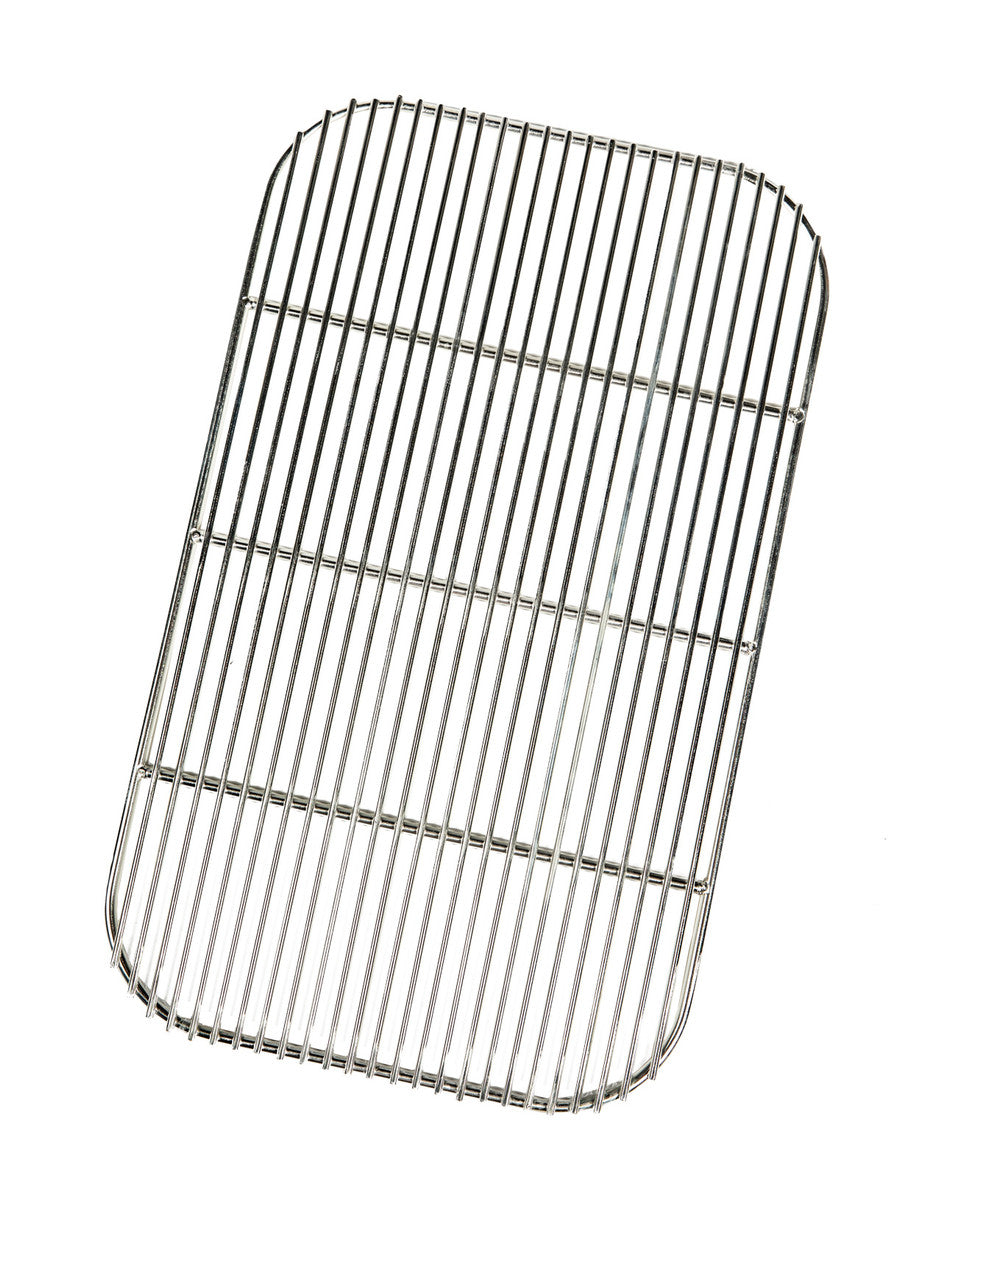 Stainless Steel Charcoal Grate For The PK300 And The Original PK